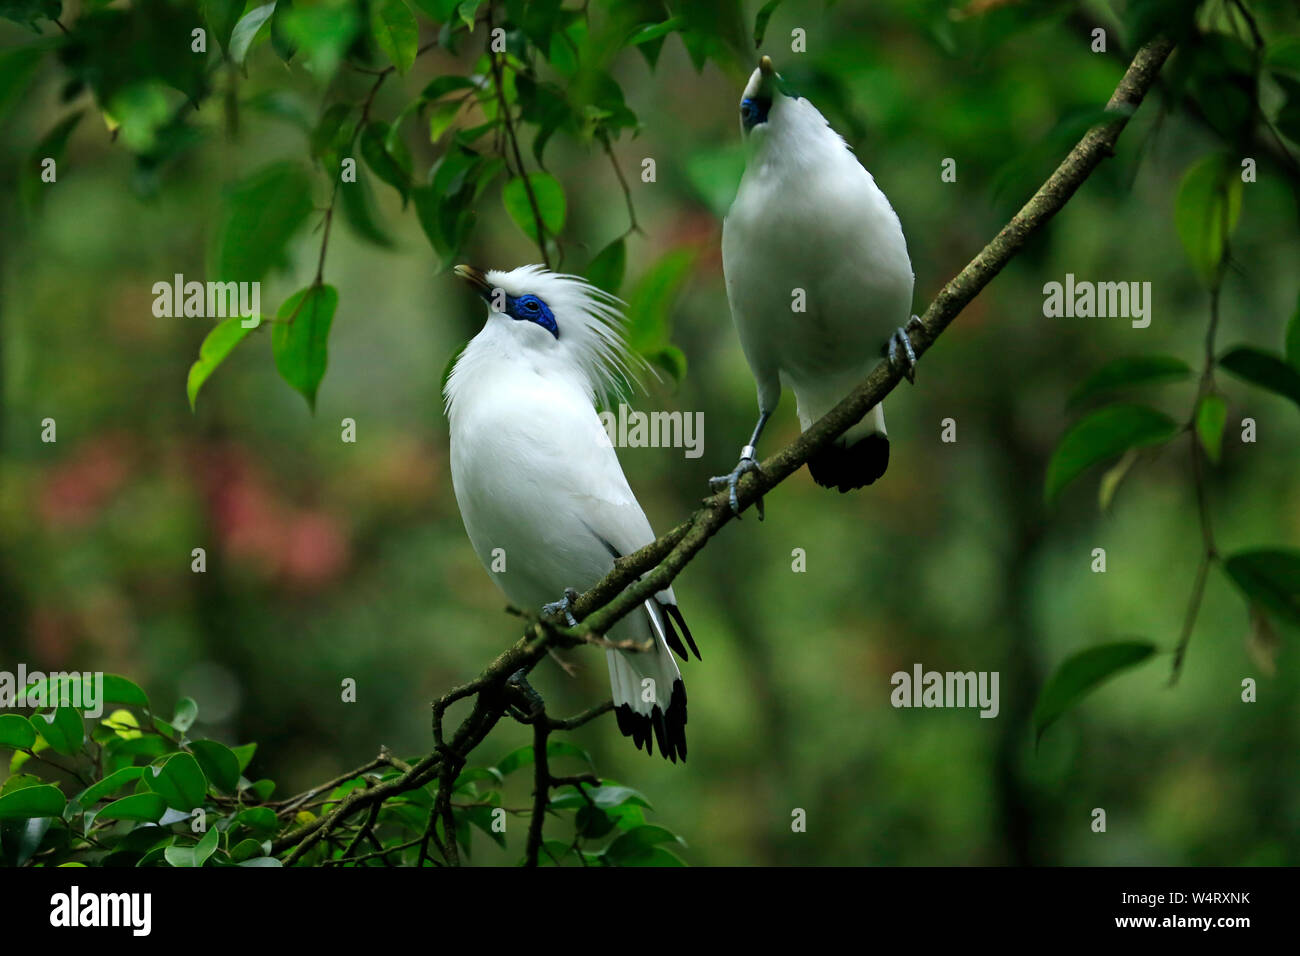 Two birds perched on a branch, Indonesia Stock Photo